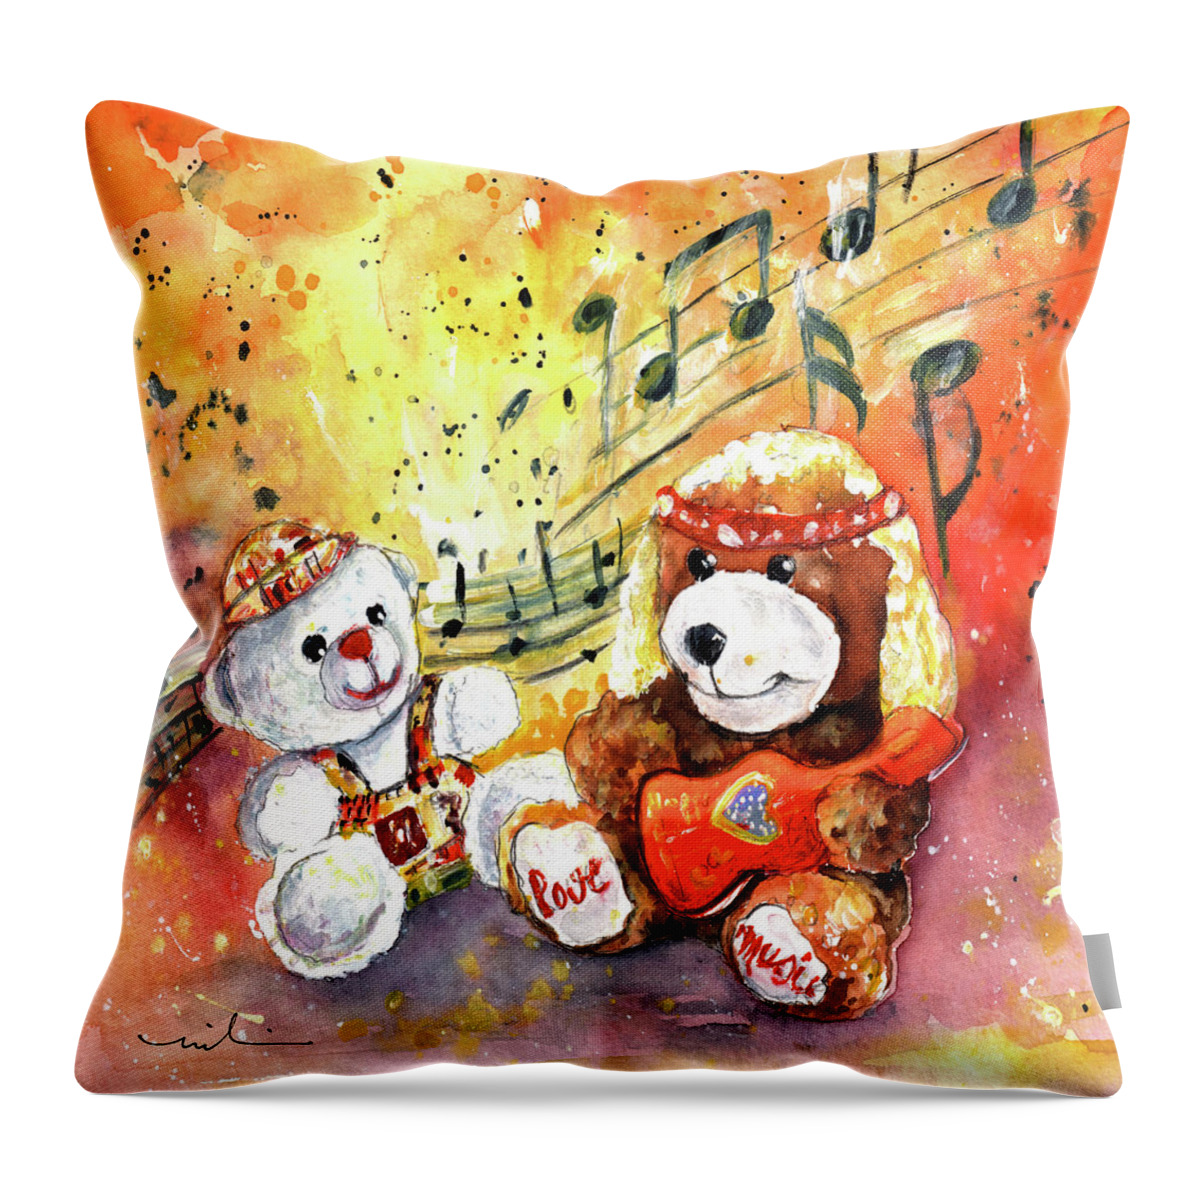 Truffle Mcfurry Throw Pillow featuring the painting Doggy Guitar And His Roadie by Miki De Goodaboom